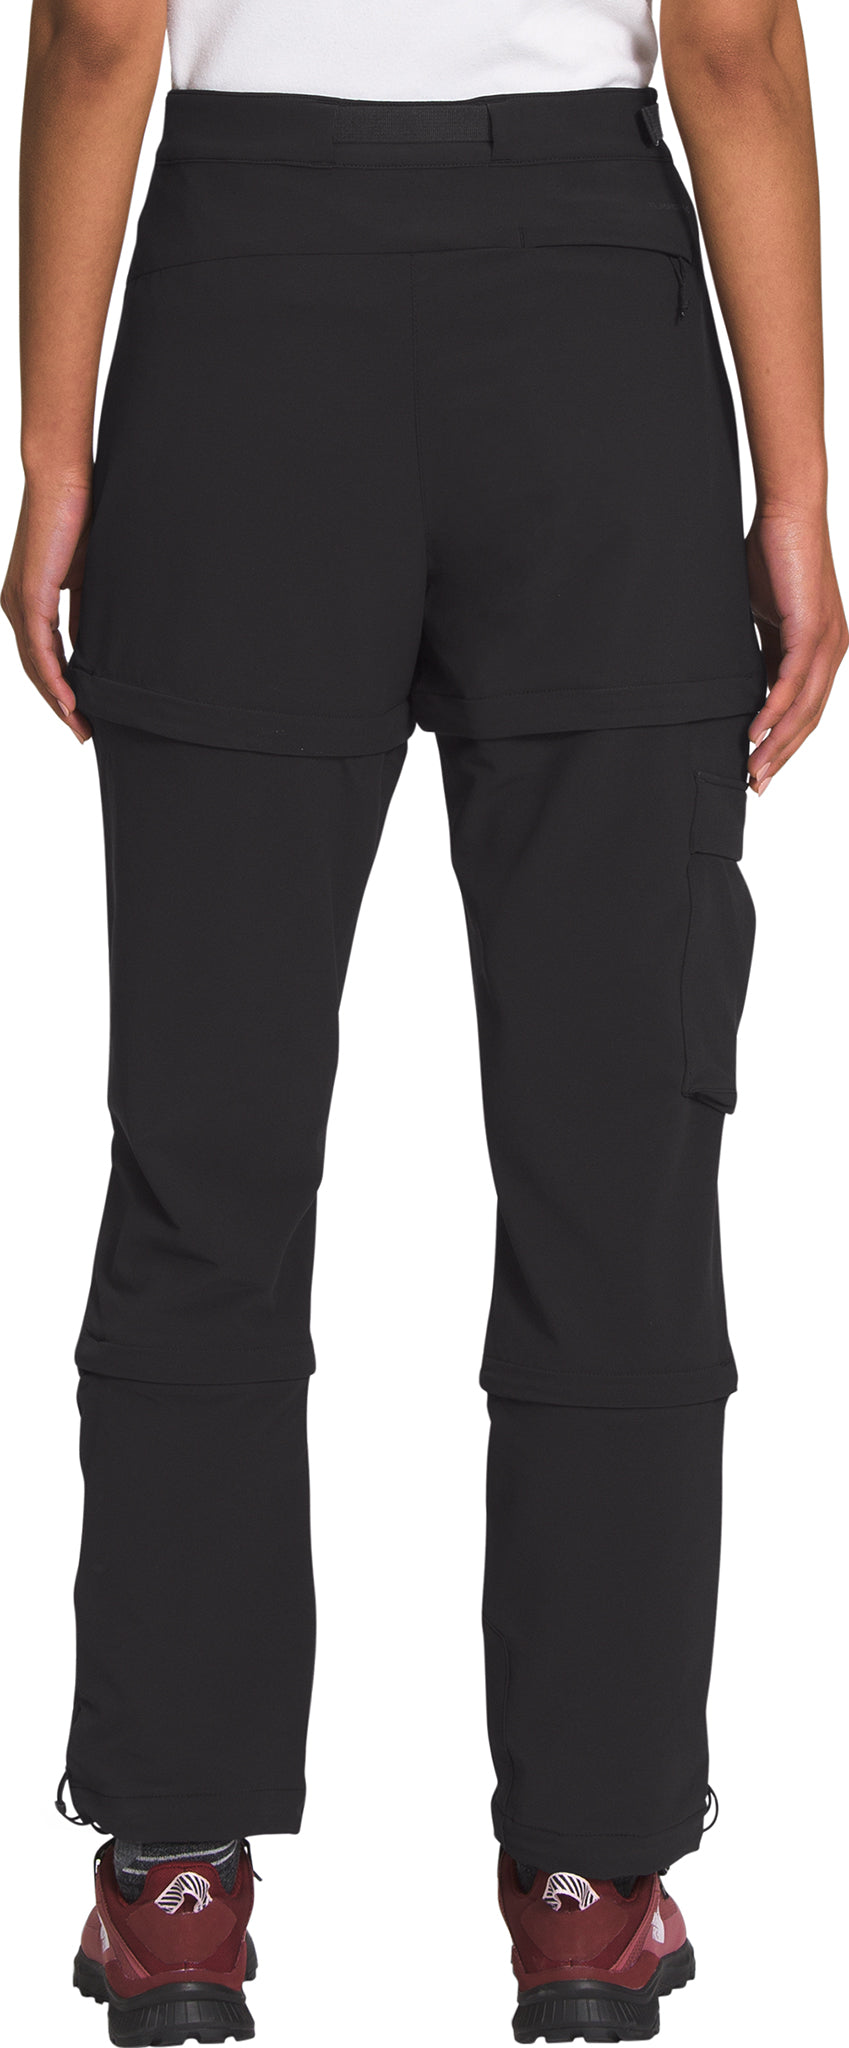 Wear First Cargo Hiking Zip Off Convertible Pants sz 10. New with